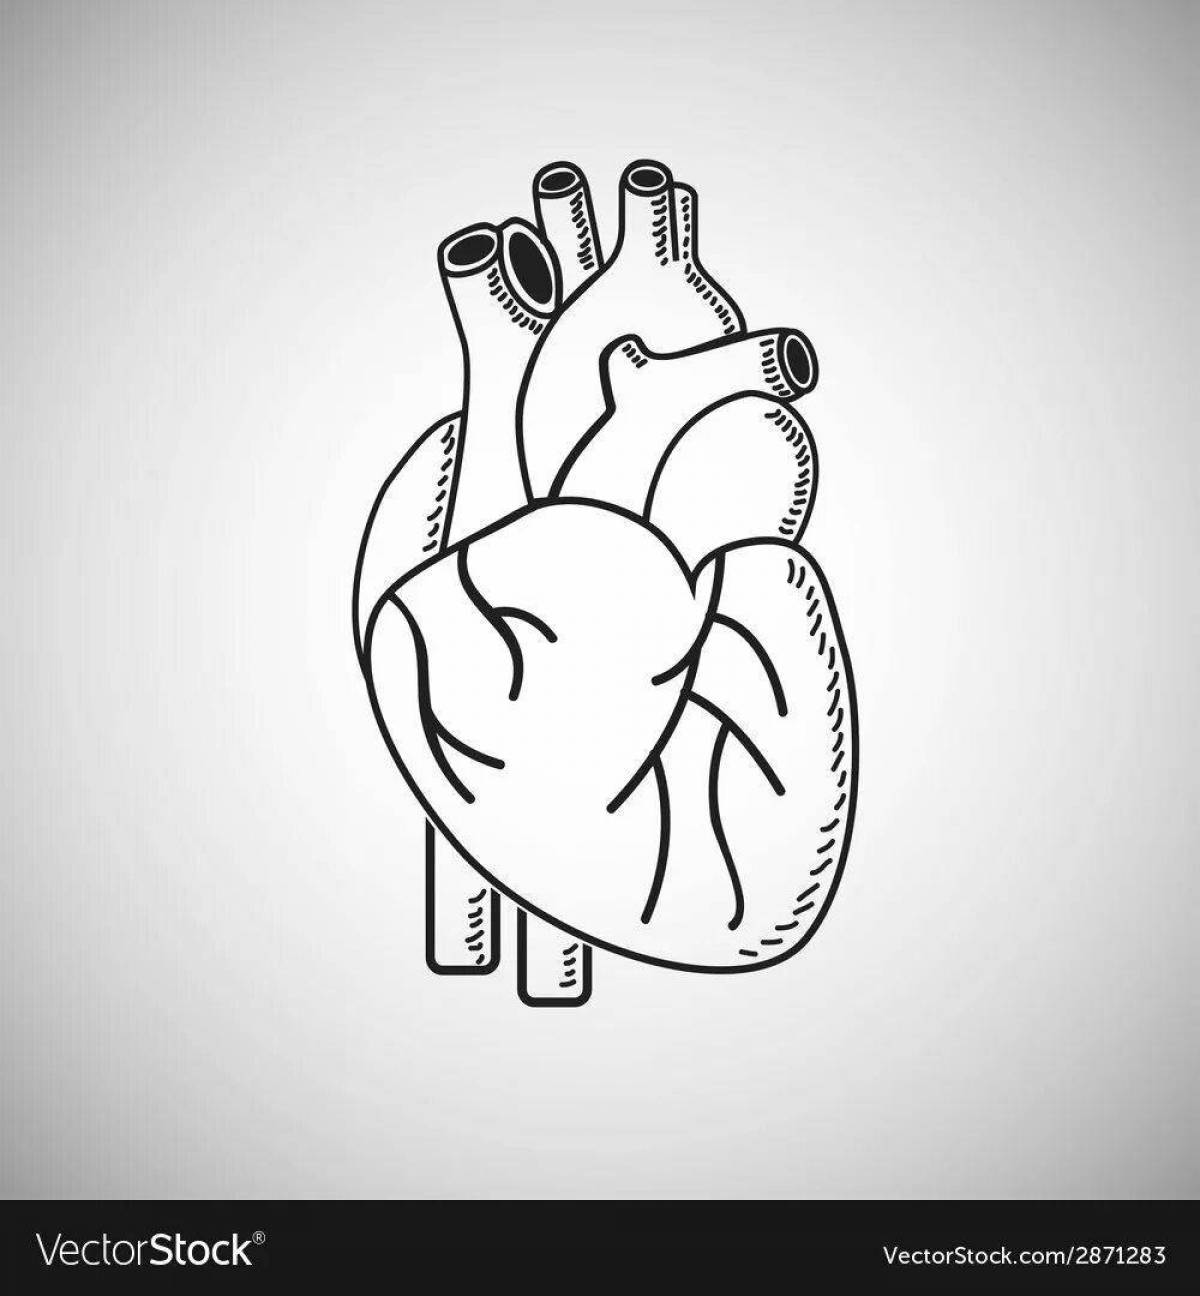 Delightful coloring of the heart organ